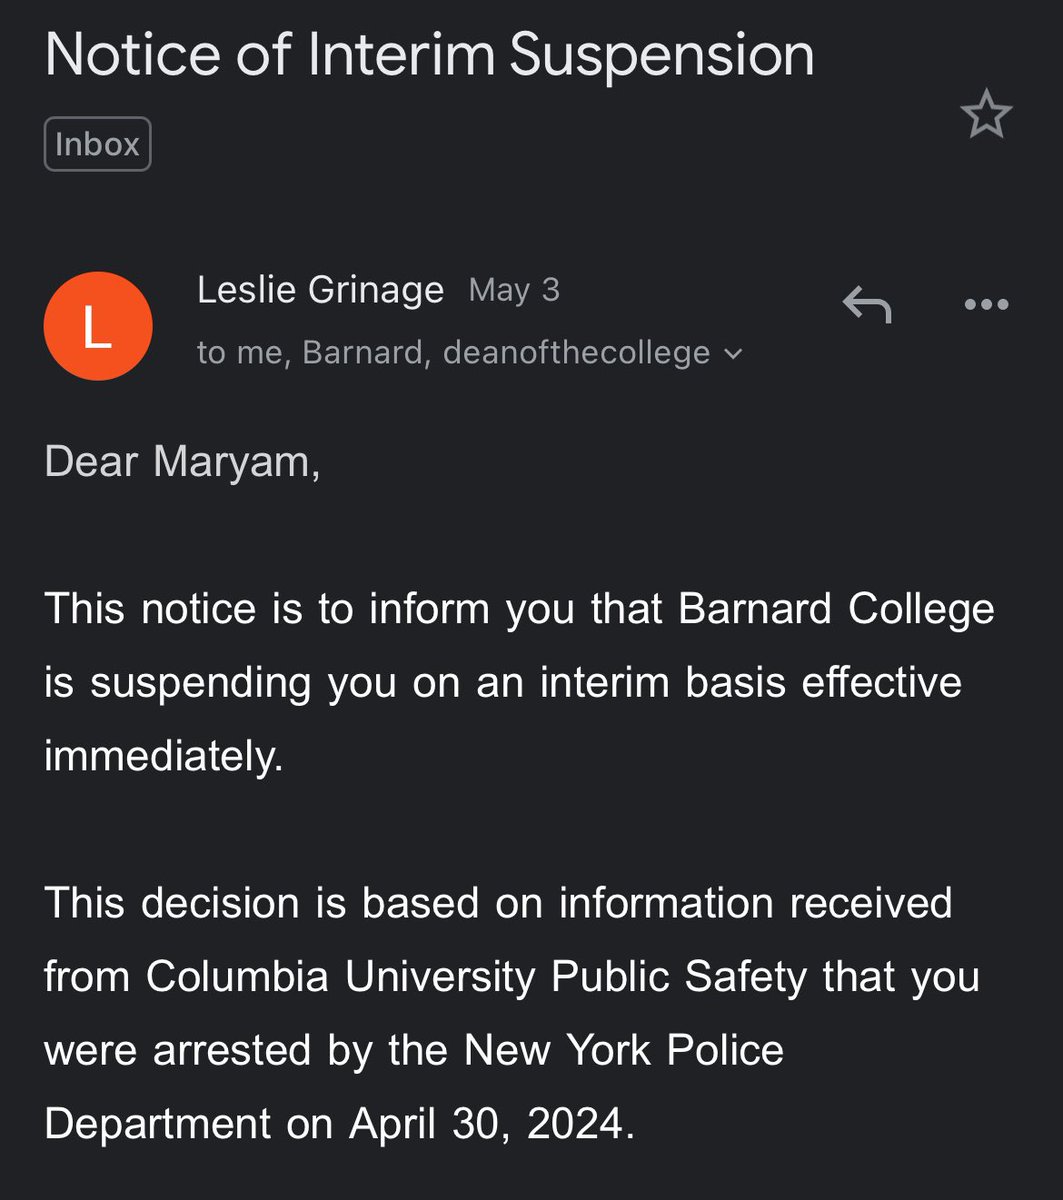 Yesterday morning, I was suspended and evicted AGAIN after one week of being unsuspended — this time for being arrested OUTSIDE Columbia’s gates. I was arrested and subsequently brutalized bc I was recording the pigs & they didn’t want people seeing what they were doing to us.